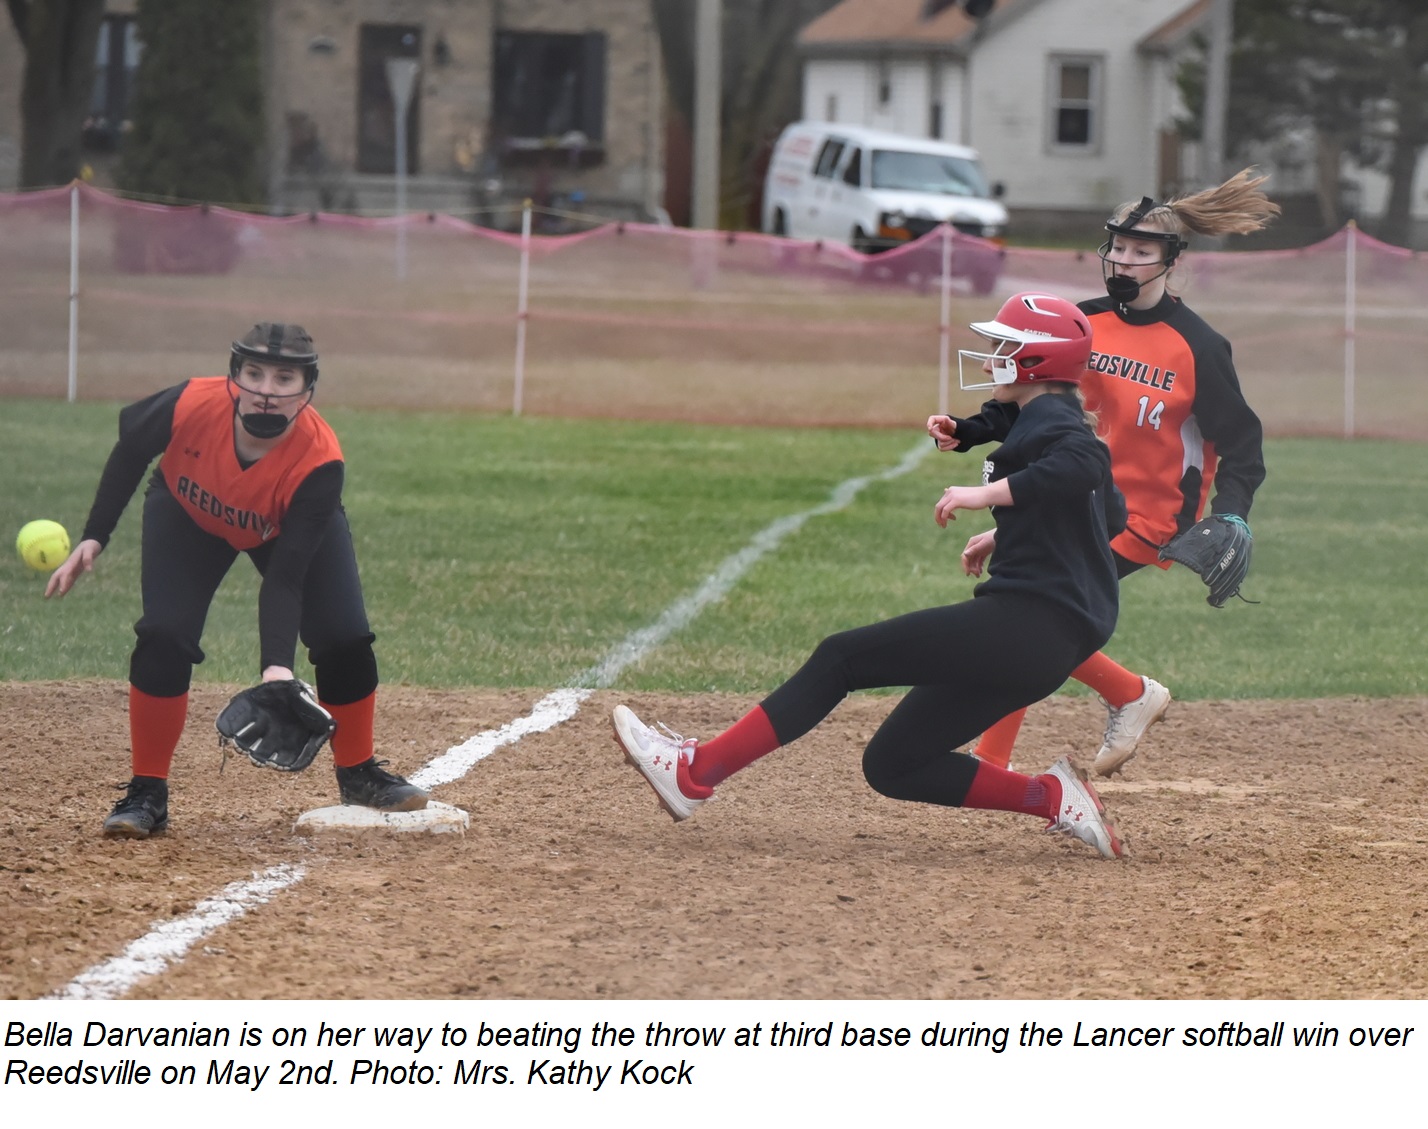 Bella Darvanian beats the throw at third during the game against Reedsville on May 2nd.